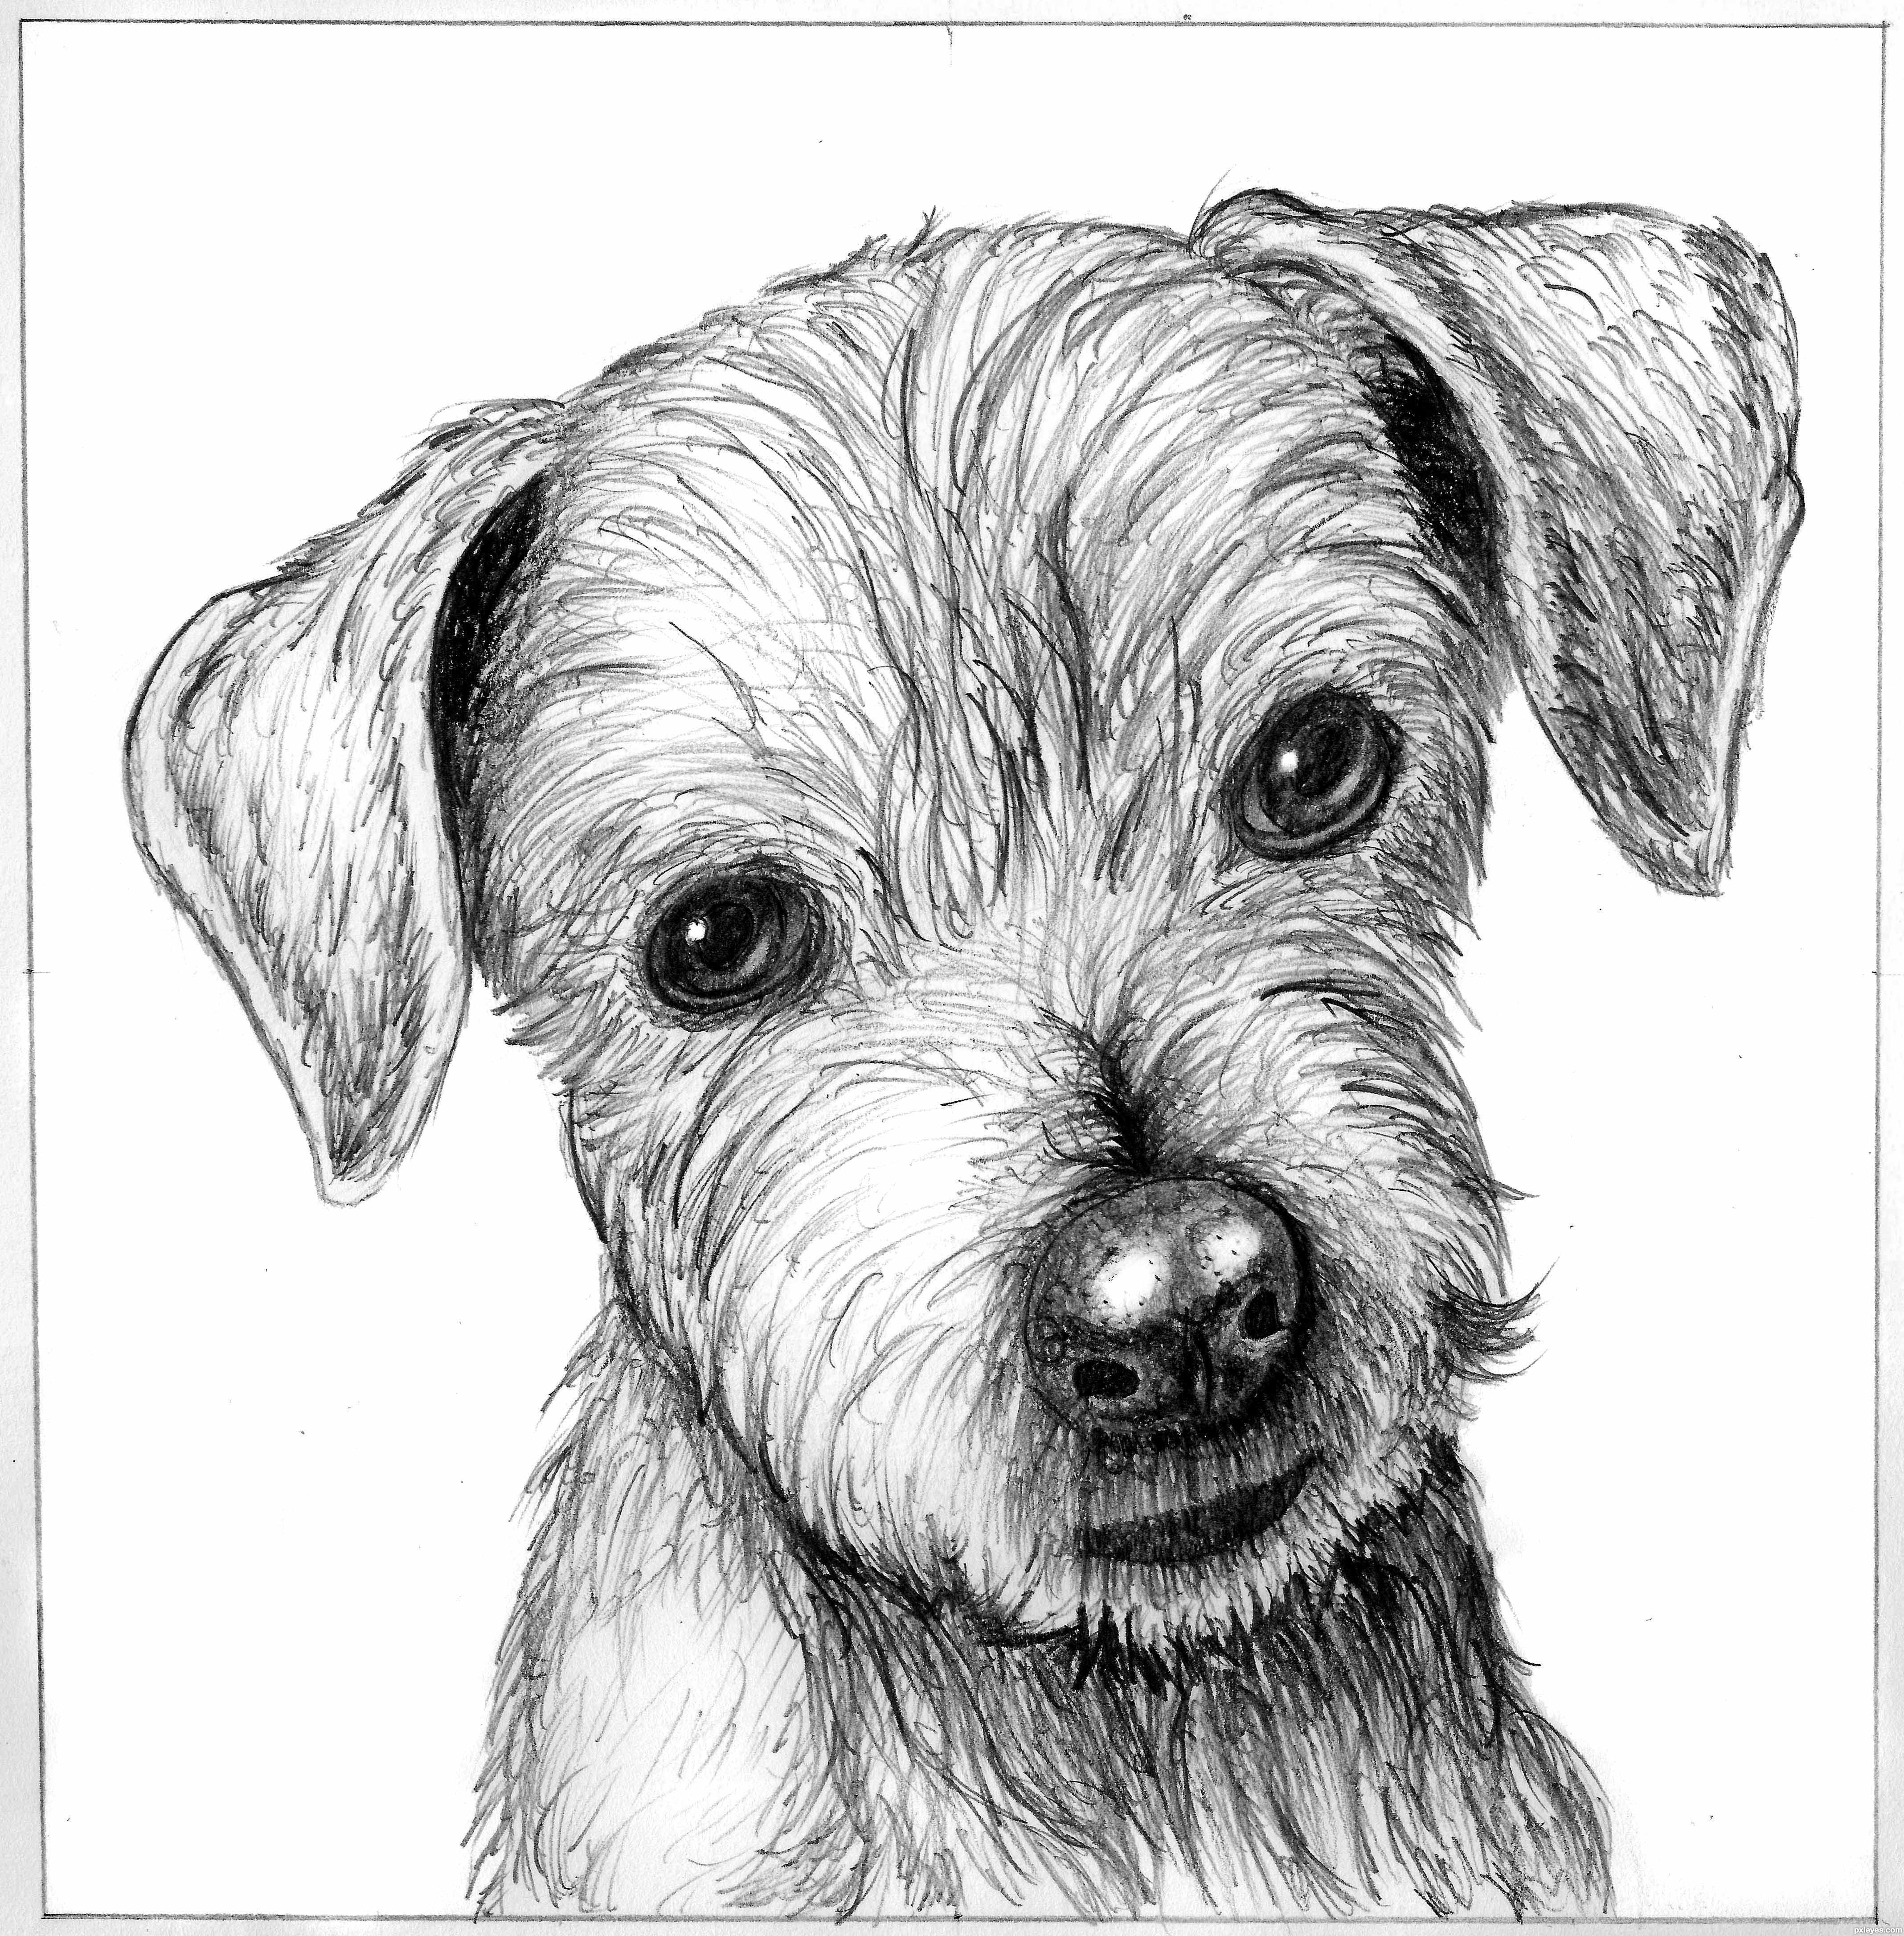 Dog's Sketch picture, by rssatnam for line work drawing contest